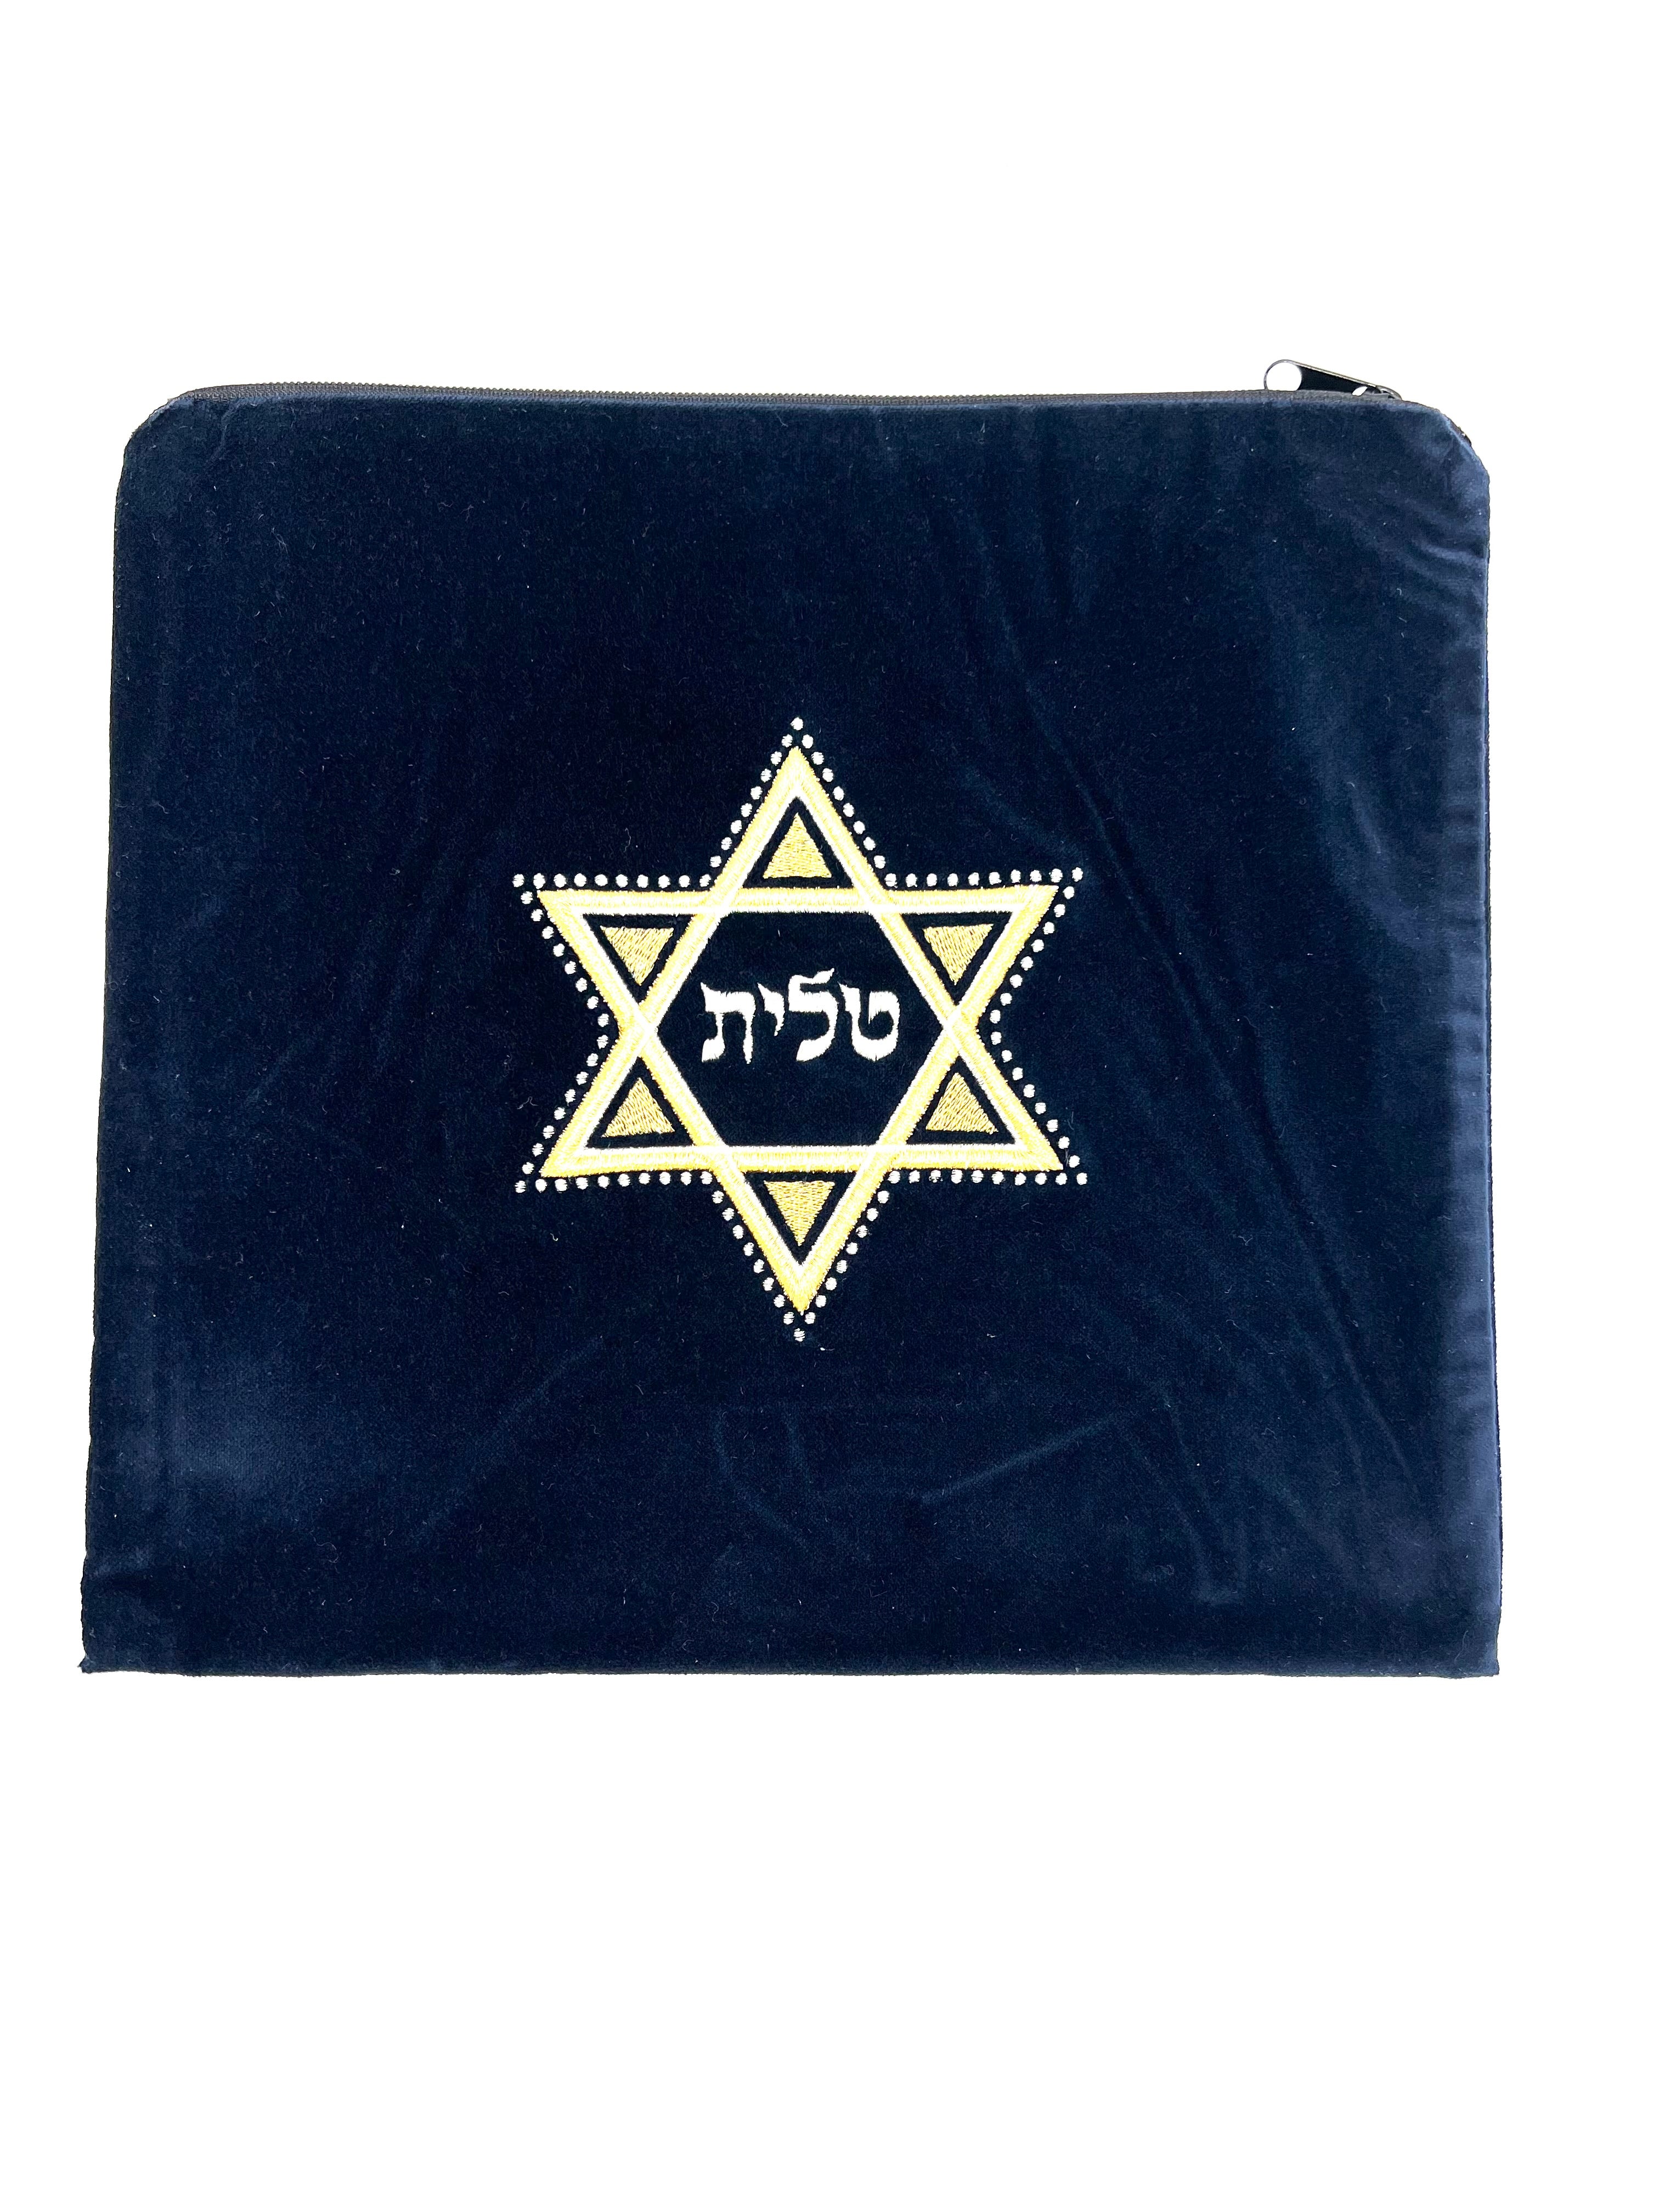 Tallit Bag in Navy and Black